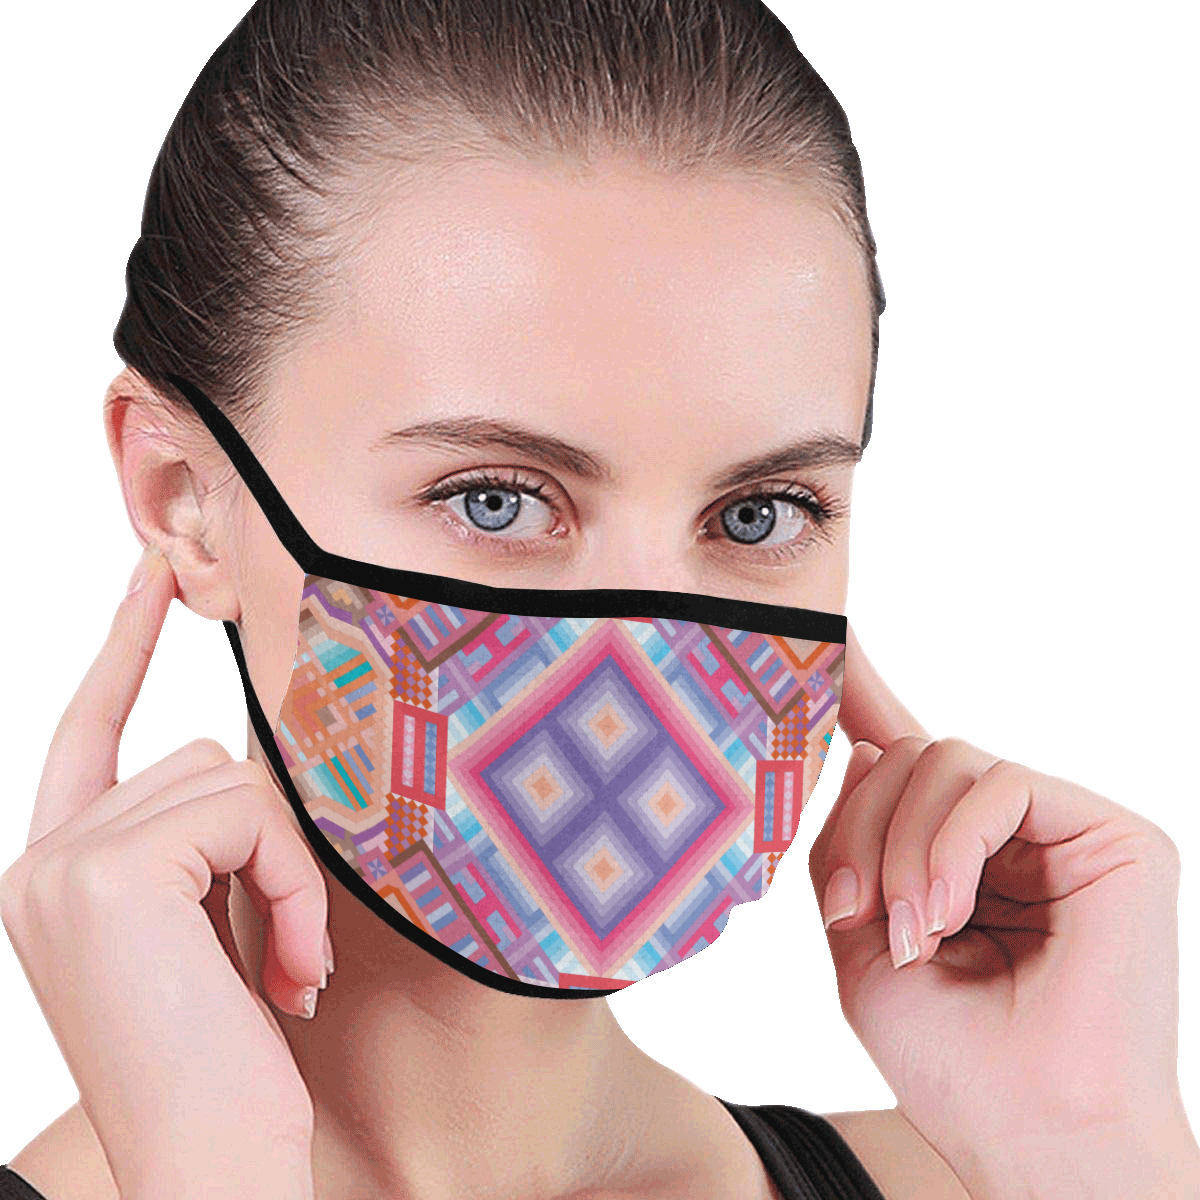 Researcher Mouth Mask